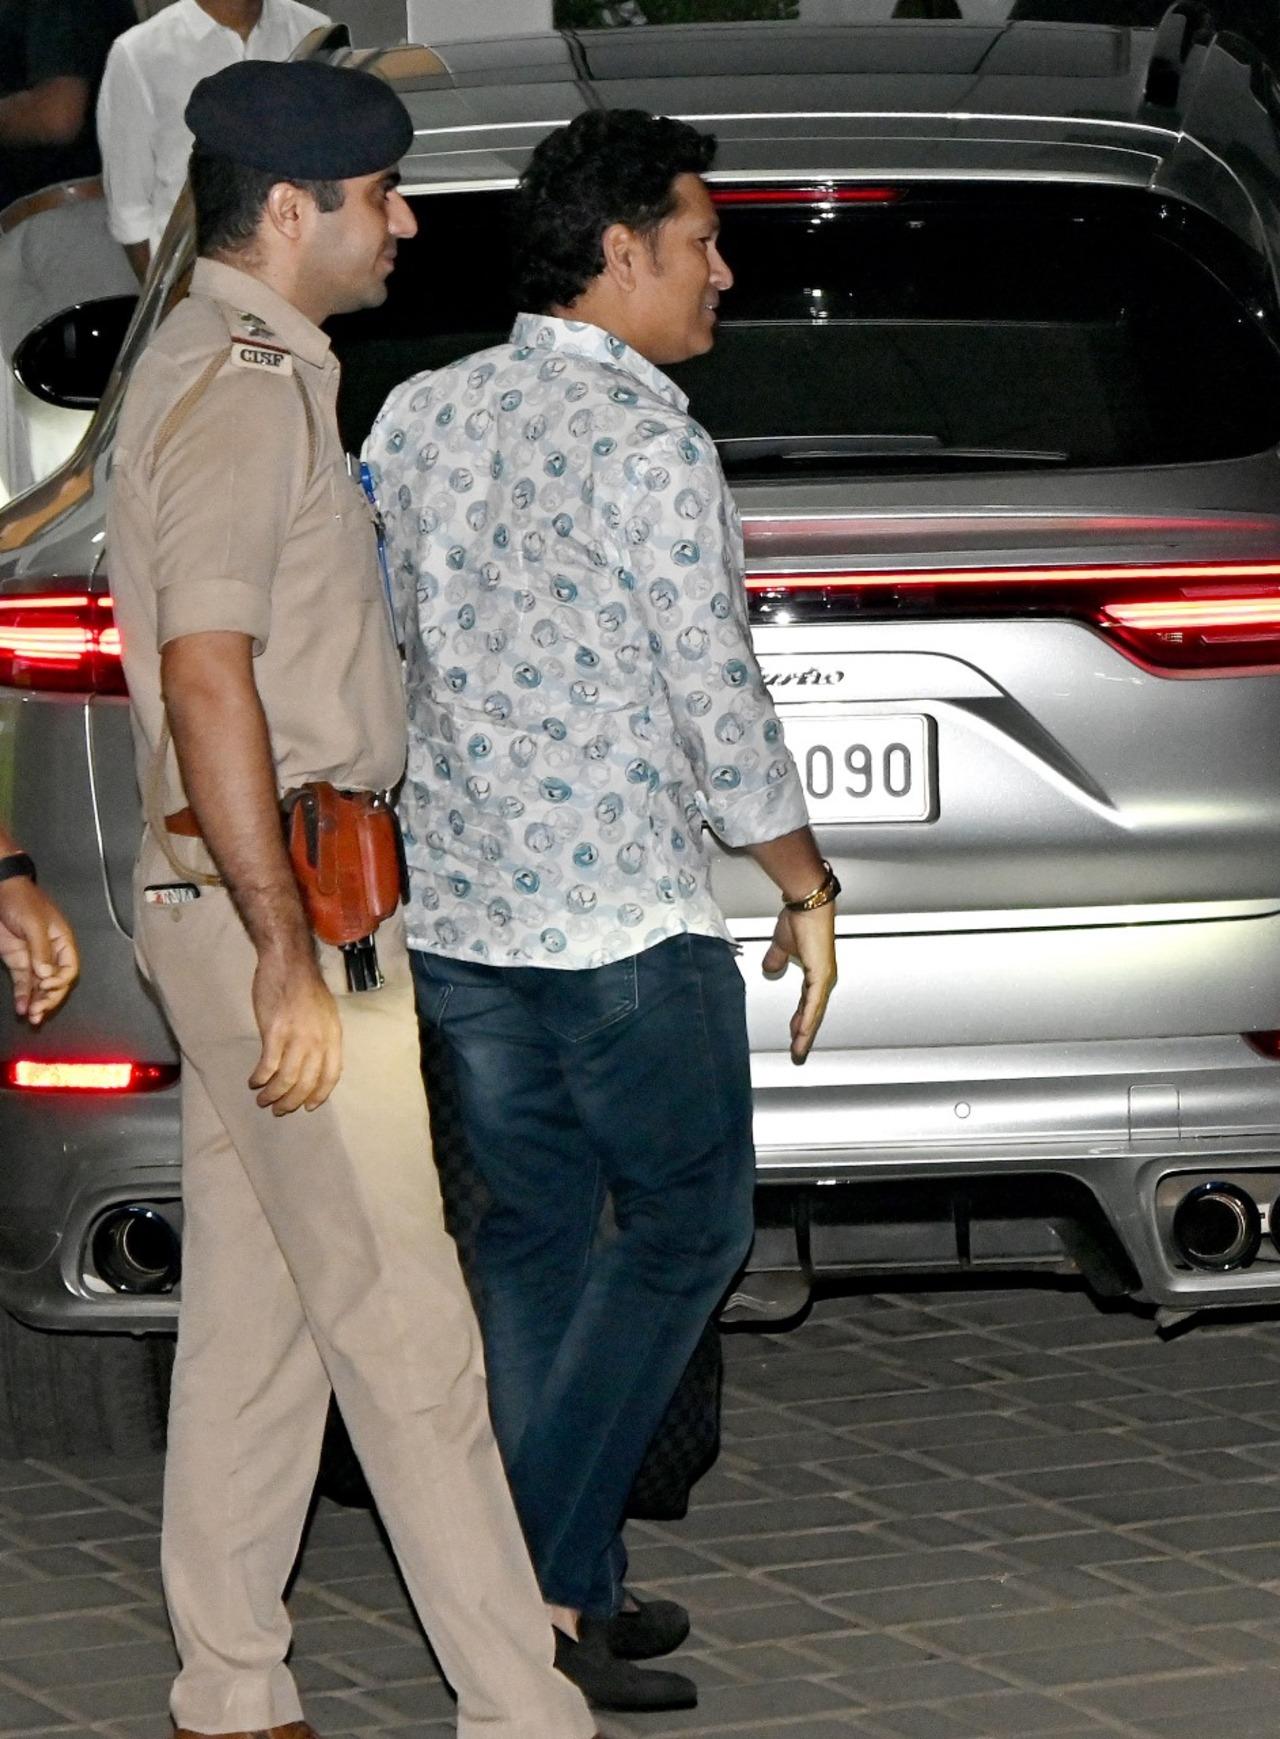 Ace cricketer Sachin Tendulkar was also spotted at the Kalina airport on Monday morning